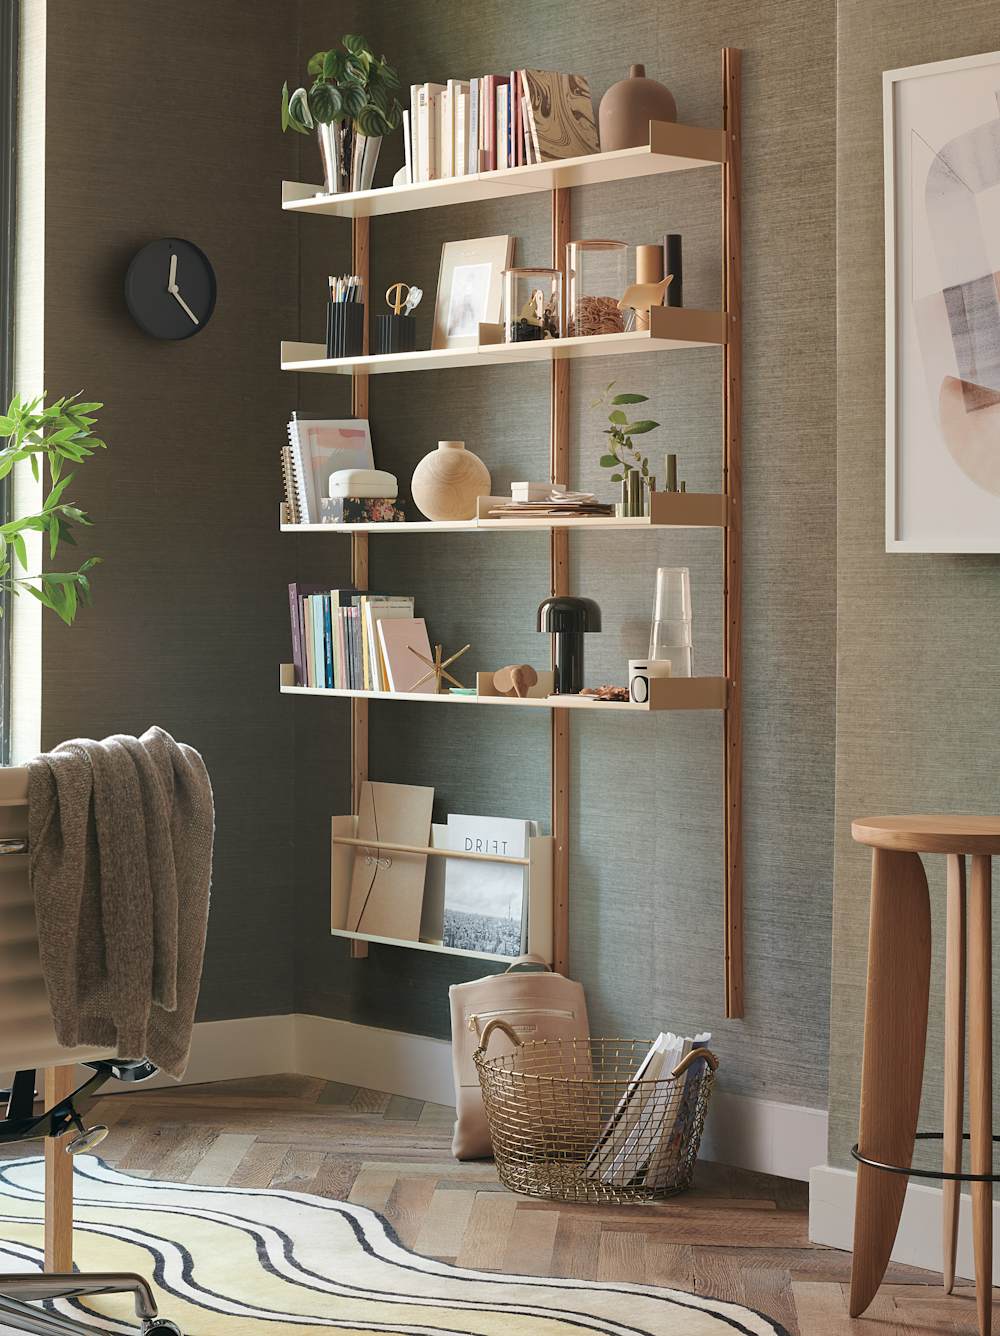 Modul Shelving, Thirteenth Stool, and Eames Aluminum Group Chair in a home office setting